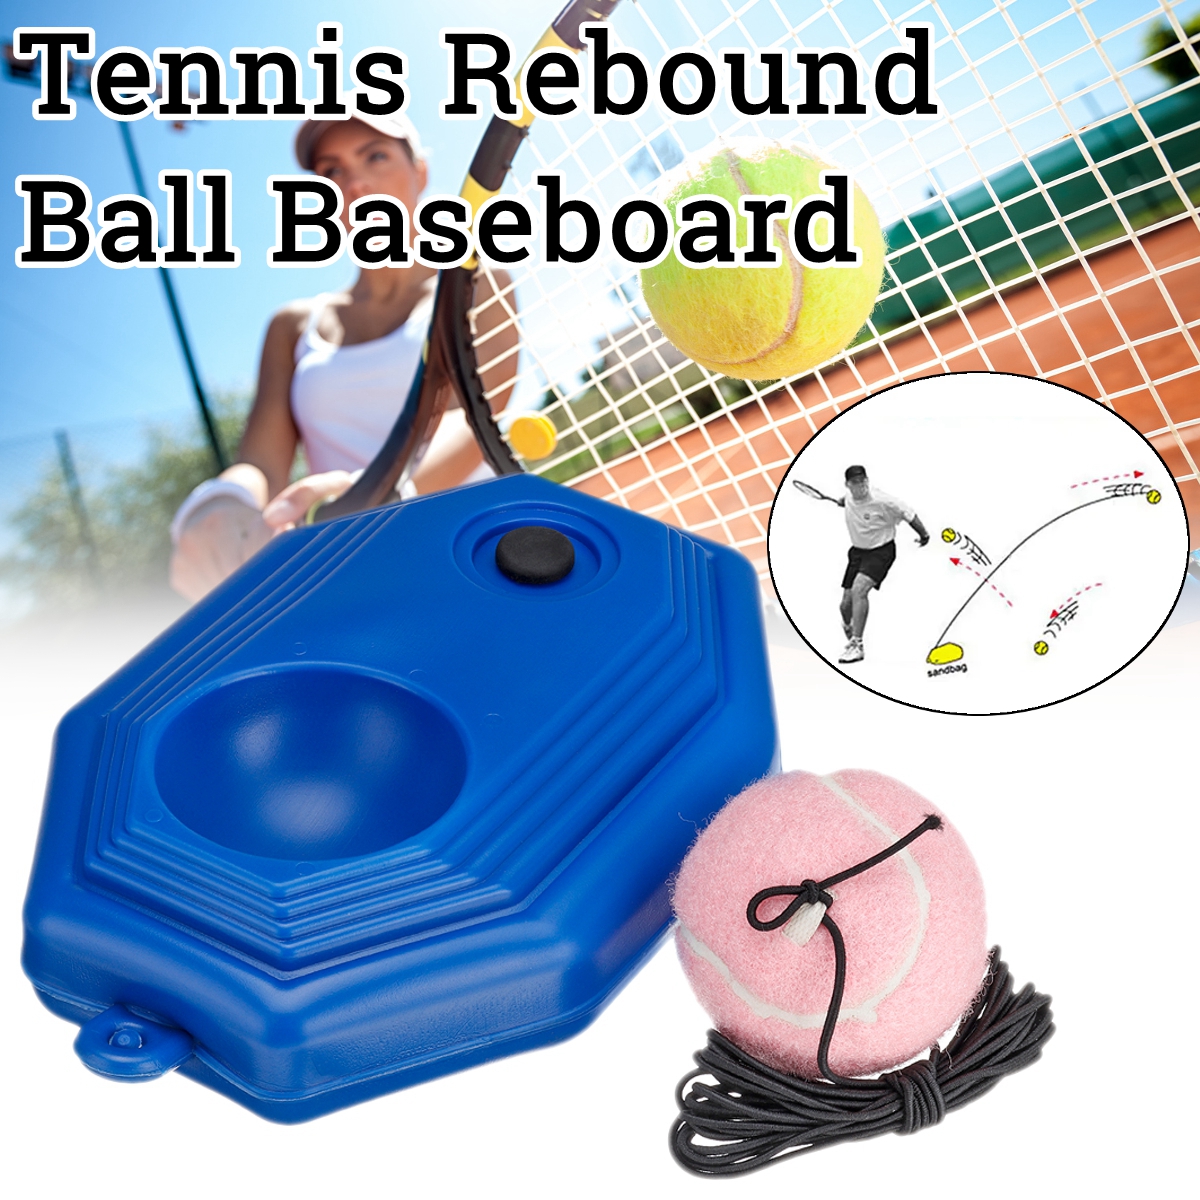 Tennis-Rebounder-Tennis-Swing-Ball-Practice-Equipment-Portable-Self-Training-Tool-with-String-1878830-1